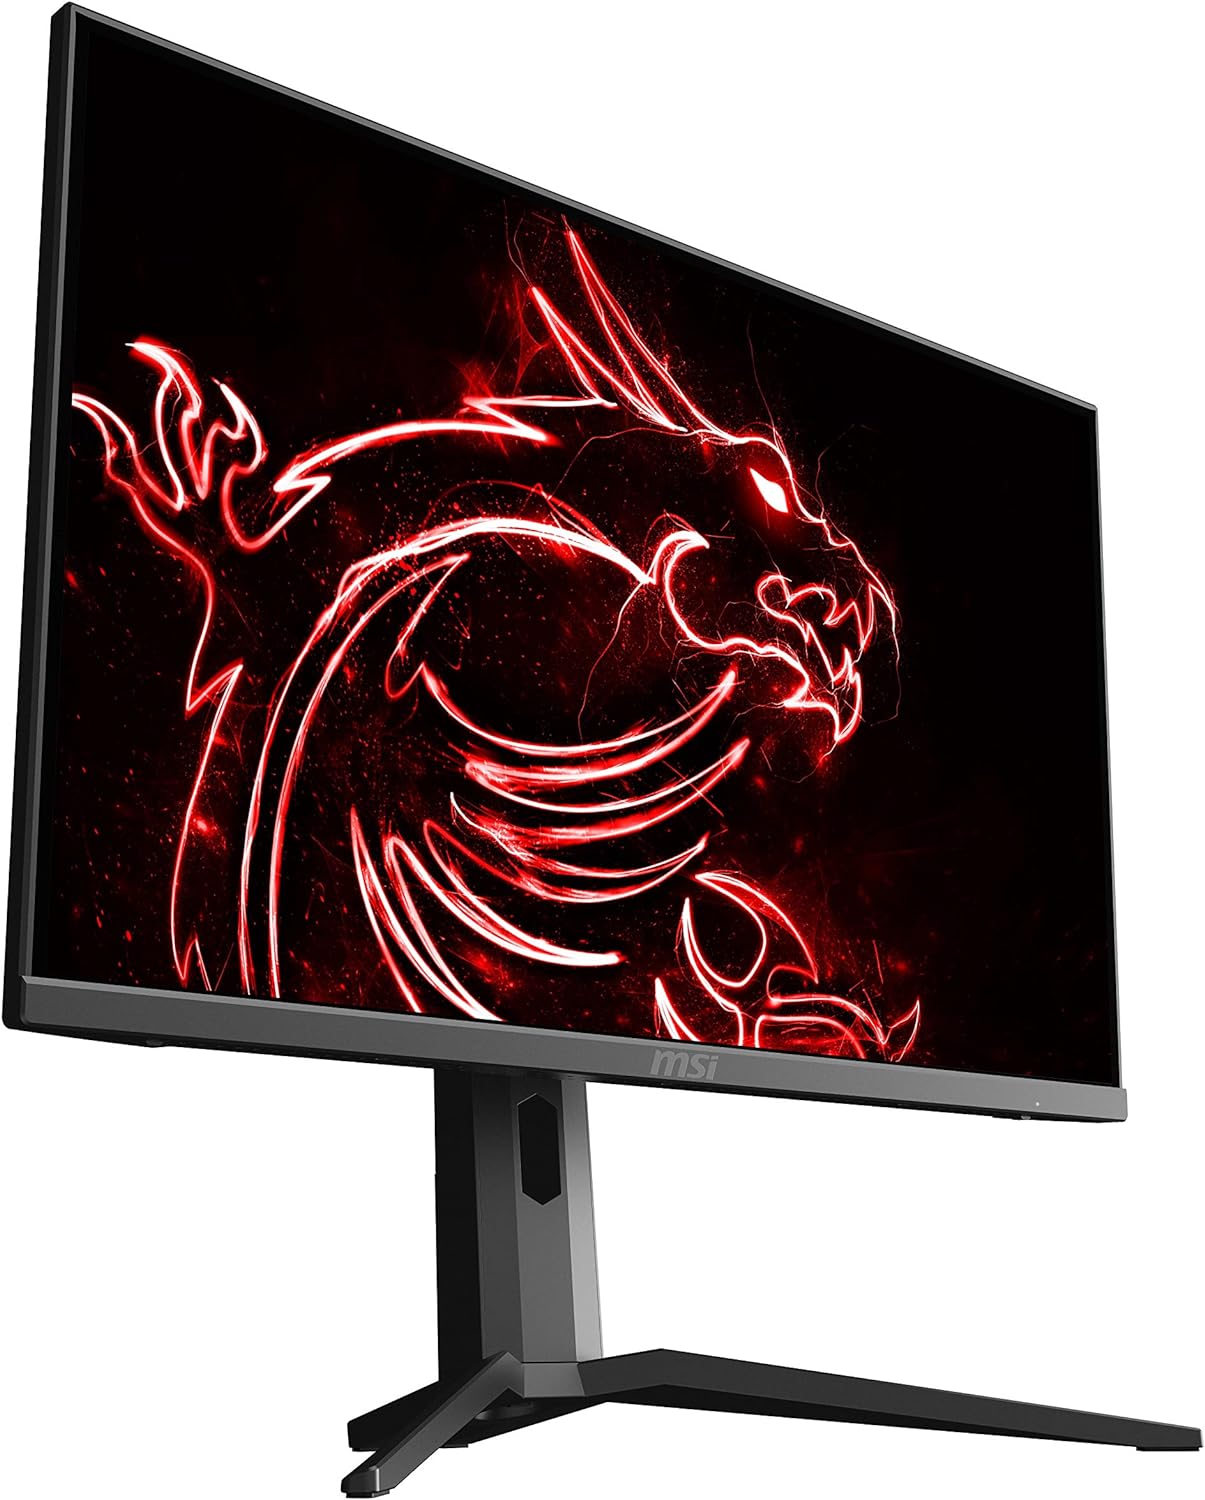 27 MSI Optix MAG273R Gaming Monitor - 144Hz Refresh Rate, Wide View Angle 0824142204221